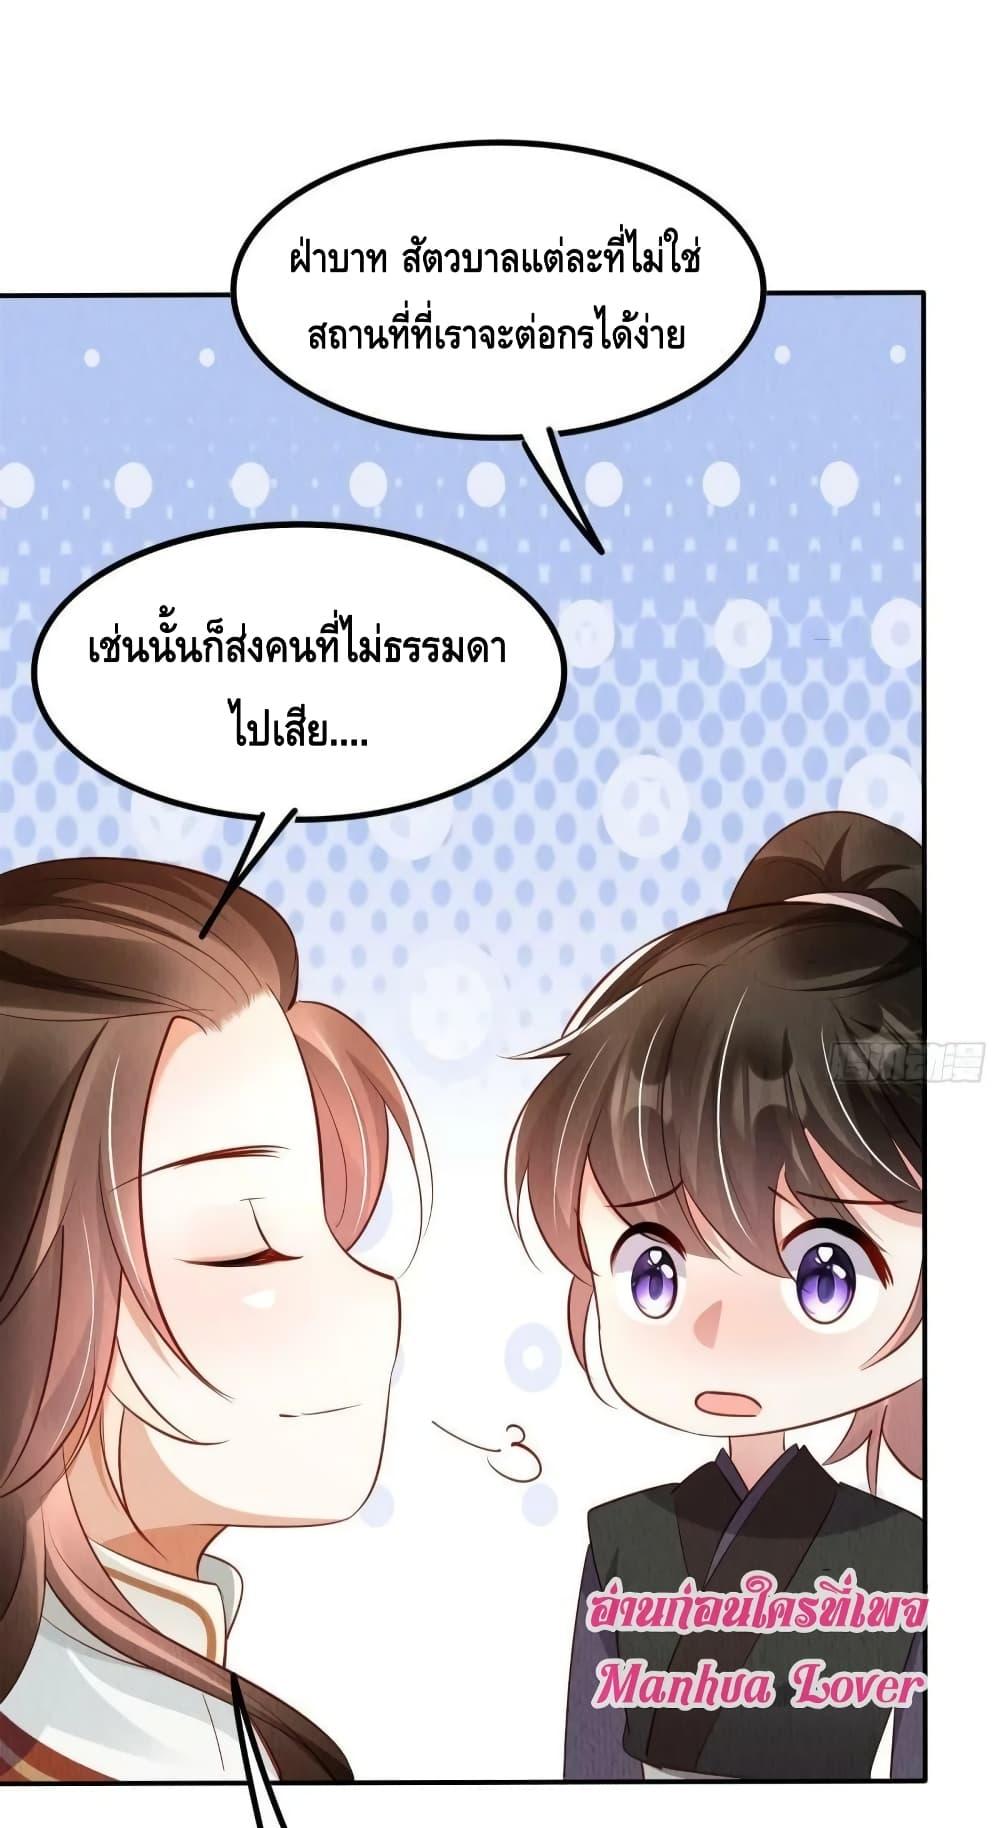 After I Bloom, a Hundred Flowers Will ill – ดอกไม้นับ ตอนที่ 53 (26)